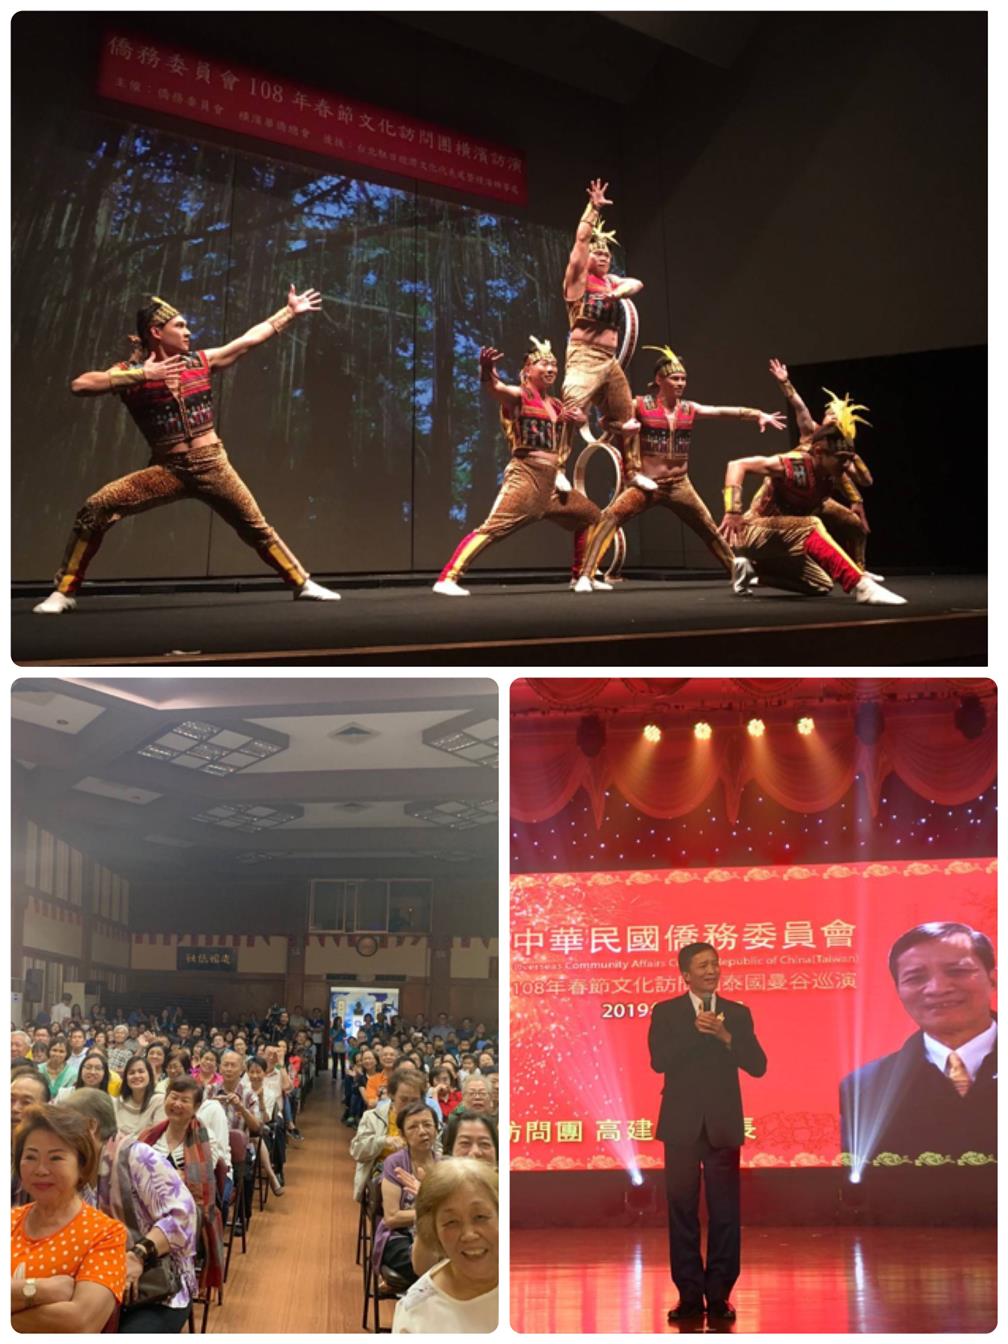 Deputy Minister Kao Chien-chih of the OCAC led the 2019 Lunar New Year Goodwill Mission Asia-Pacific Tour; the tour involved performances in 13 cities in eight countries and was a resounding success.